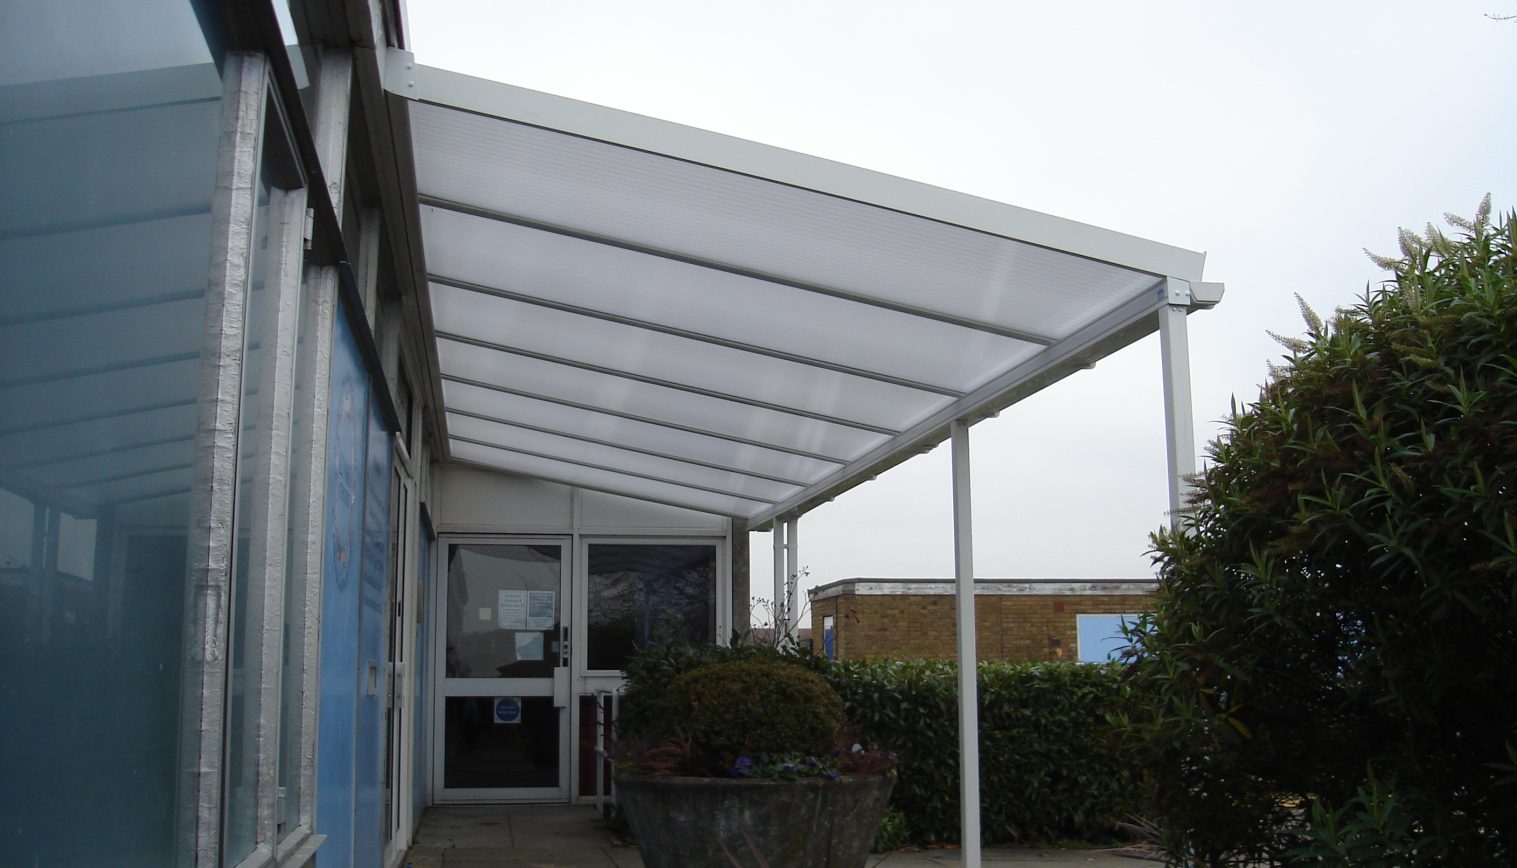 The Links Education Support Centre – Wall Mounted Canopy